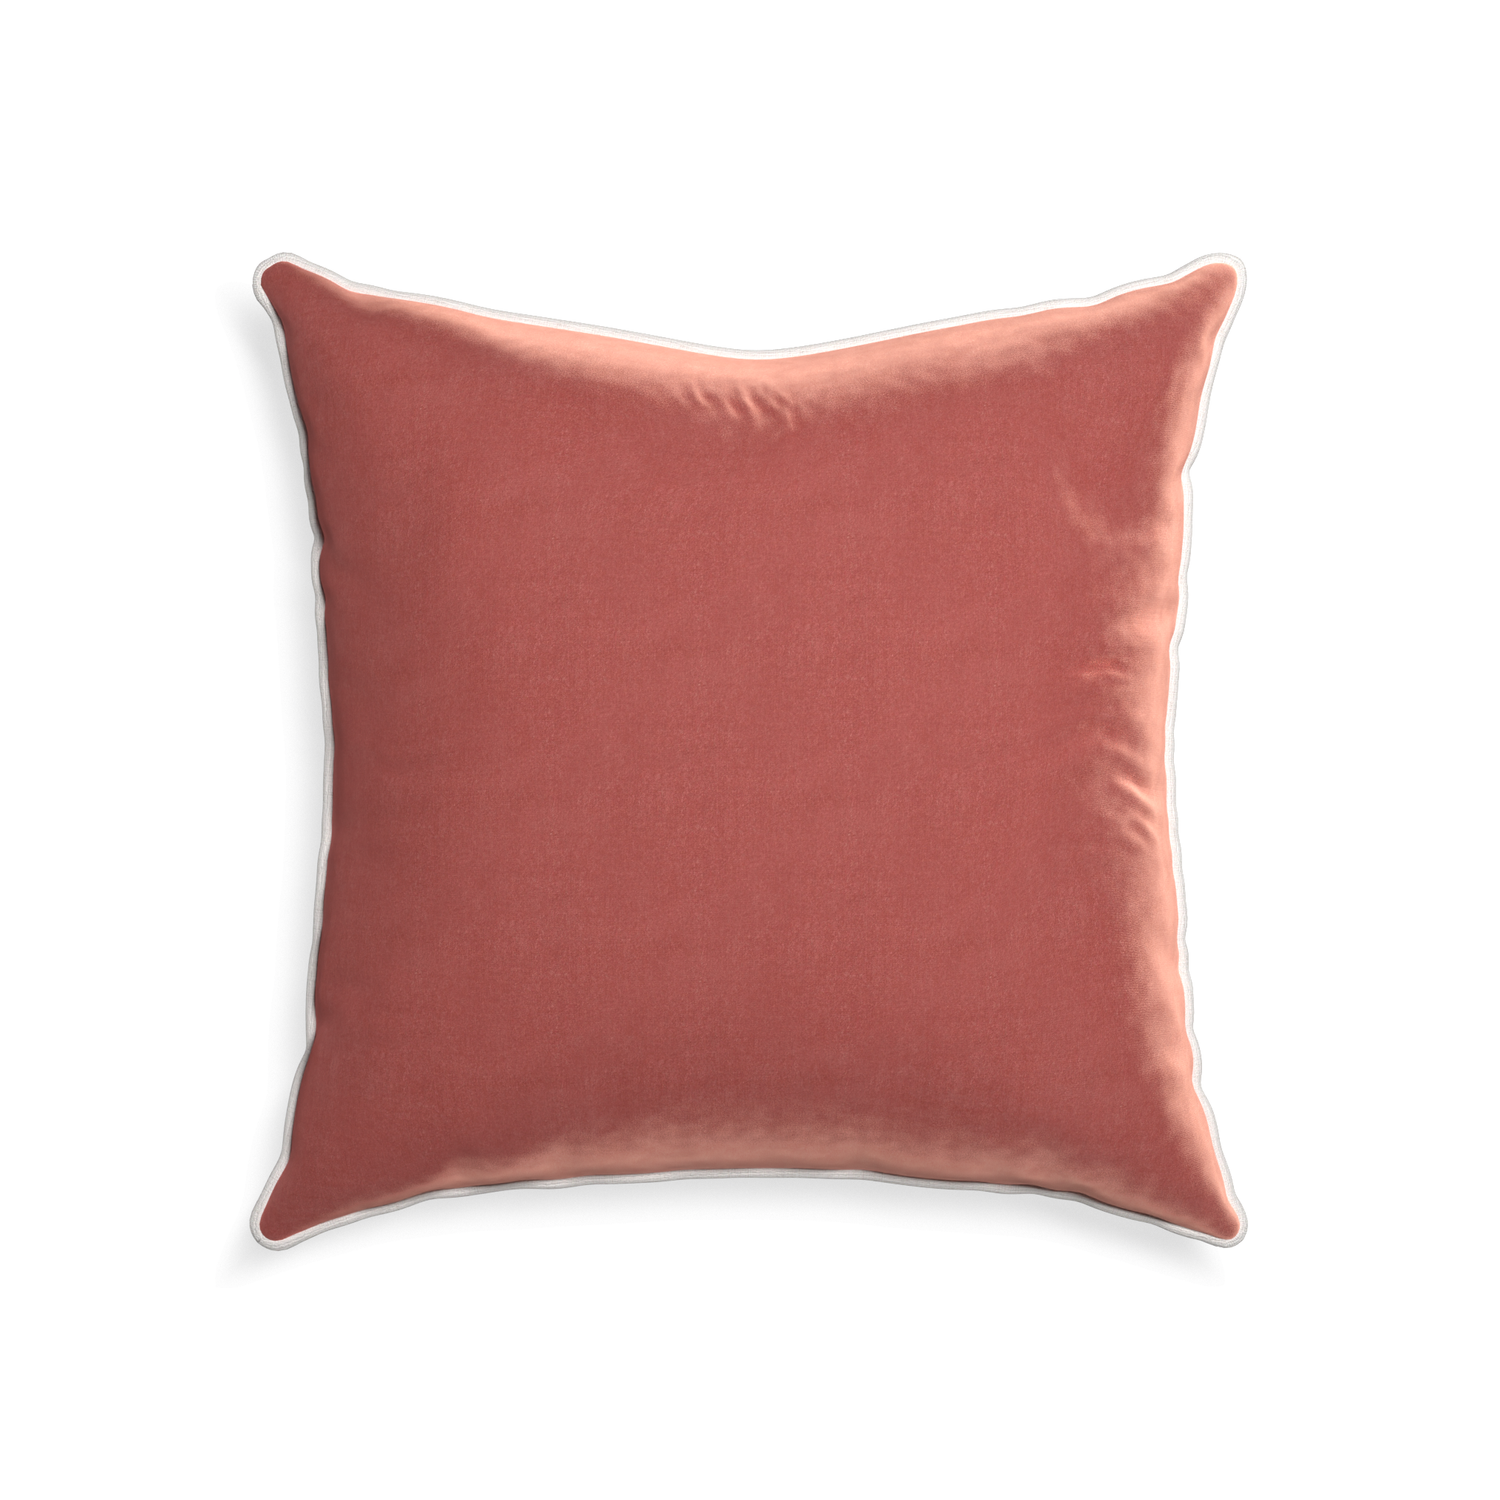 22-square cosmo velvet custom coralpillow with snow piping on white background